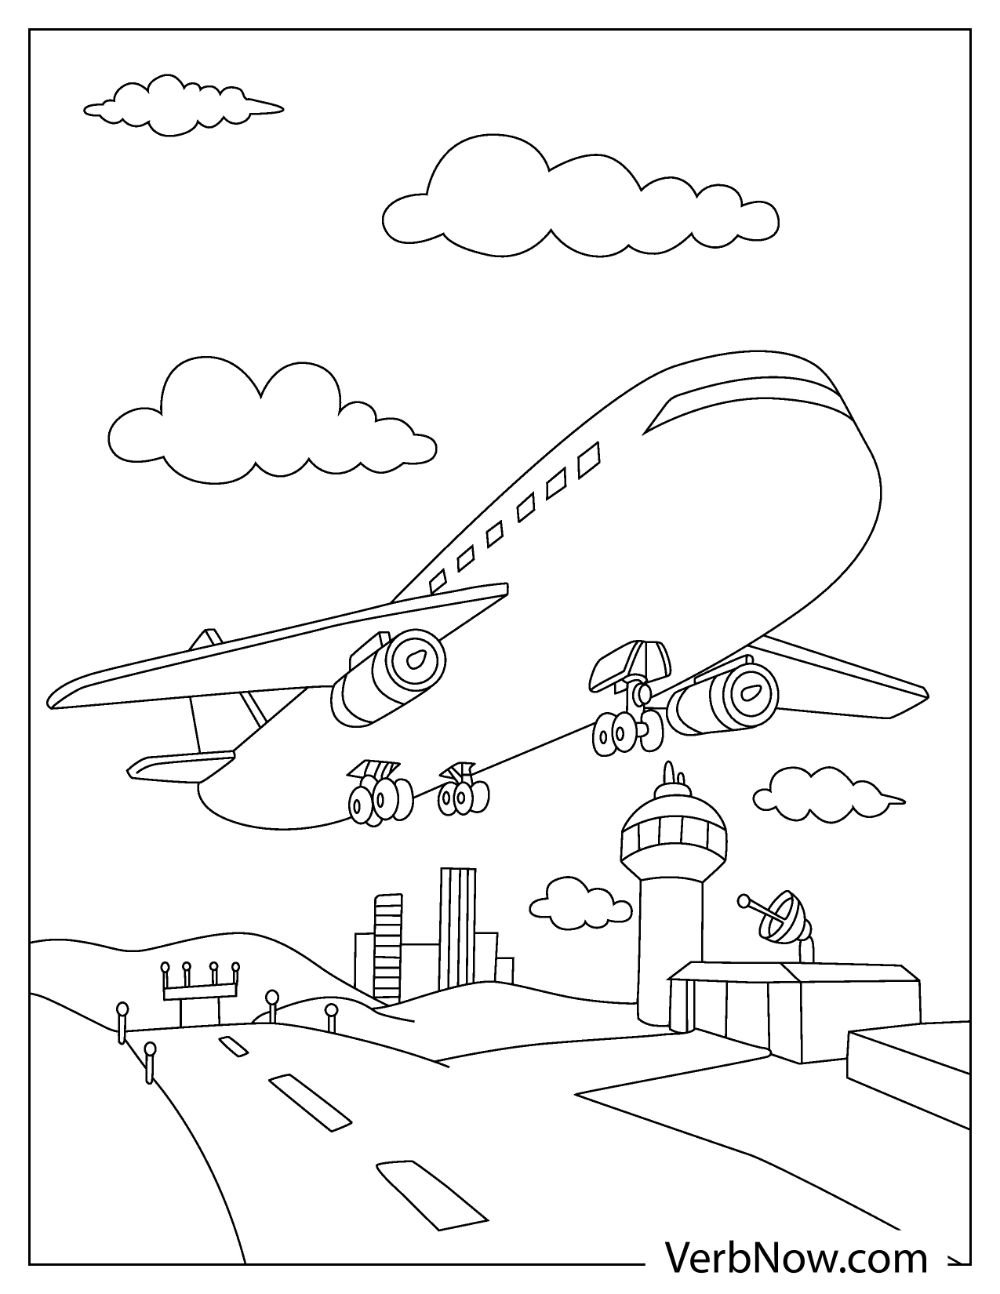 Free AIRPLANE Coloring Pages & Book for Download (Printable PDF) - VerbNow